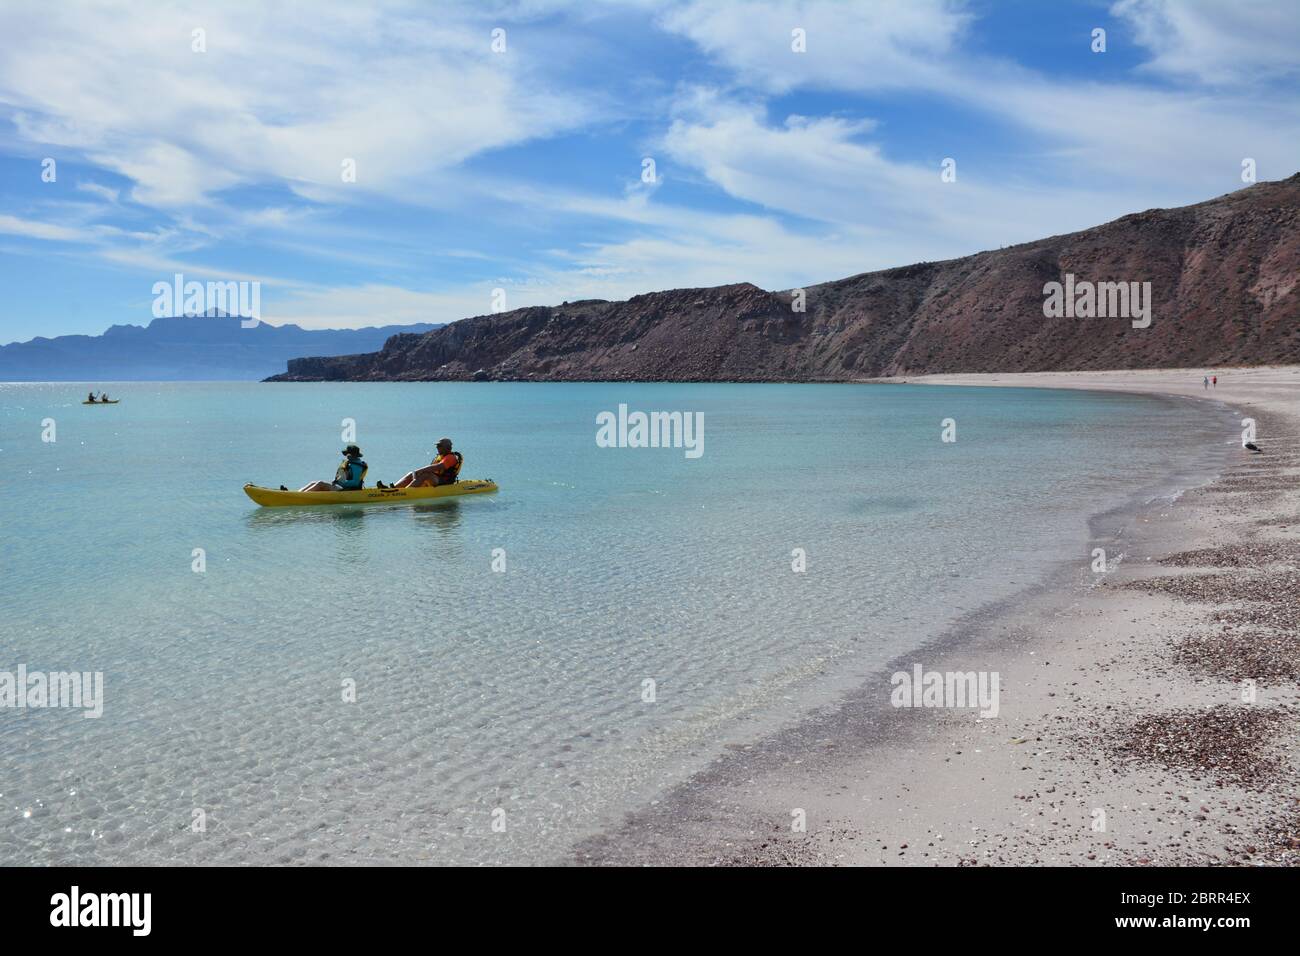 Active cruise tourists kayak in clear water off a beach on Isla San Francisco, Sea of Cortez, Baja California Sur, Mexico. Stock Photo